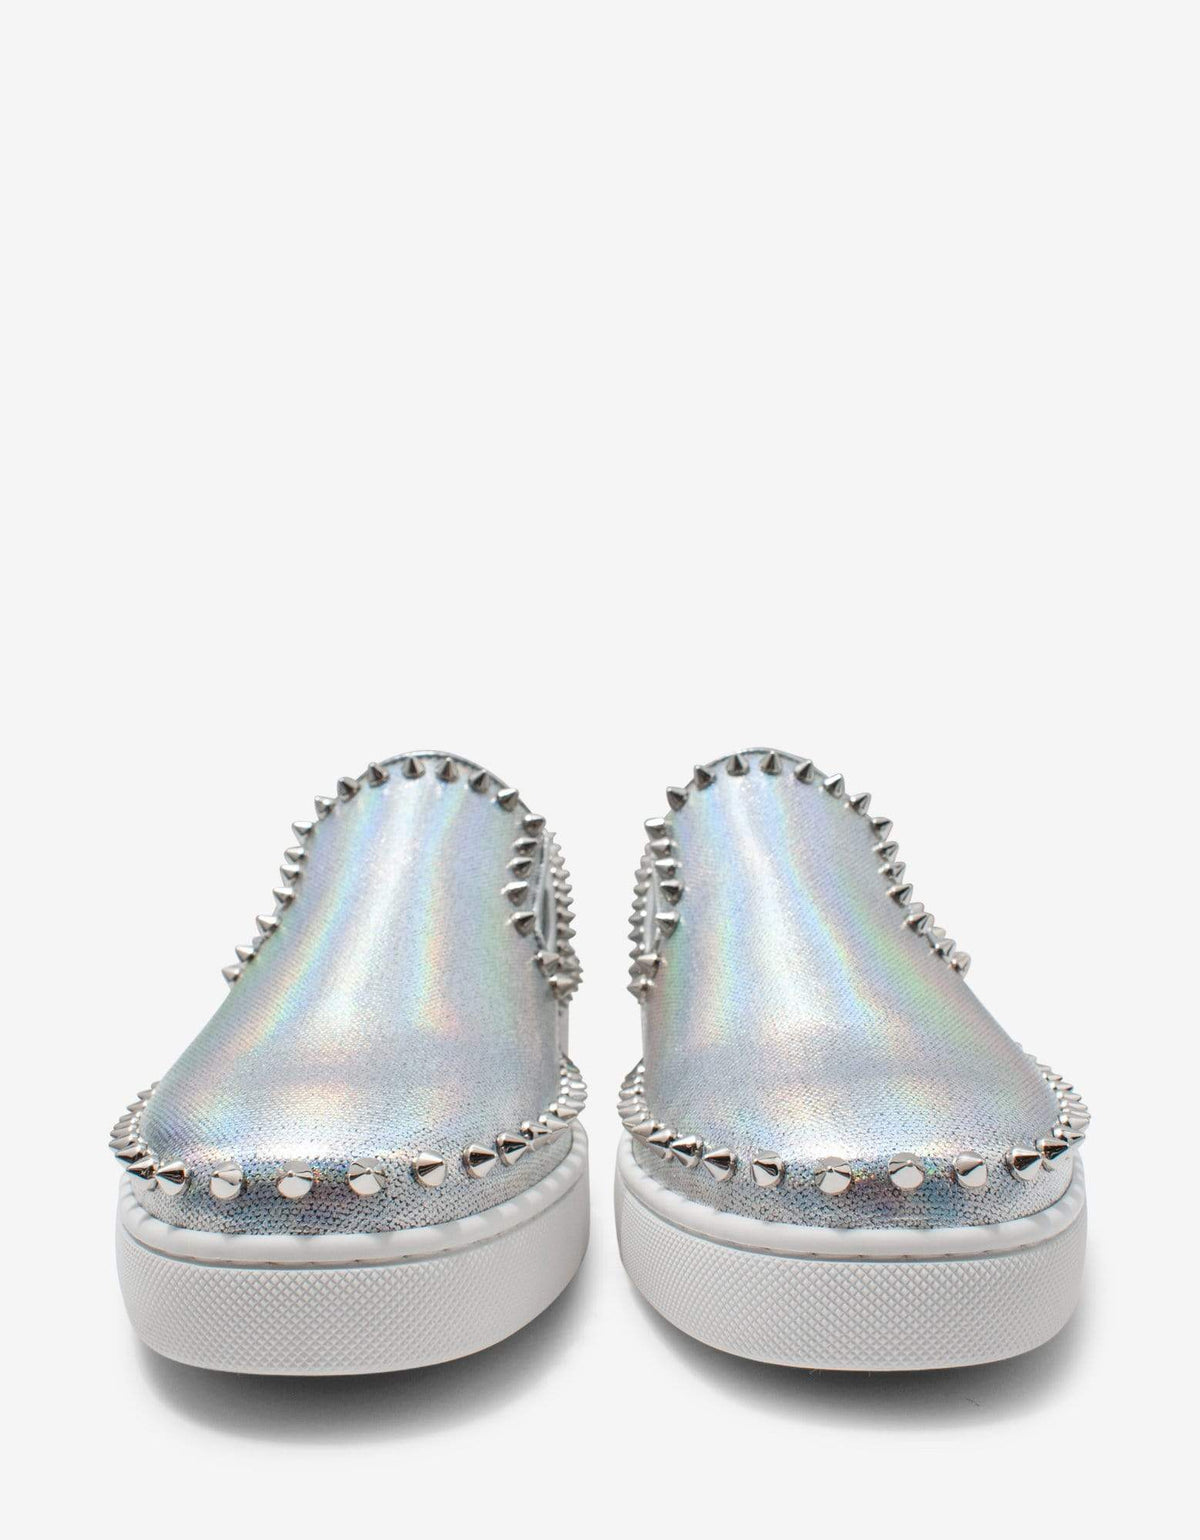 Christian Louboutin Pik Boat Silver Coated Canvas Trainers